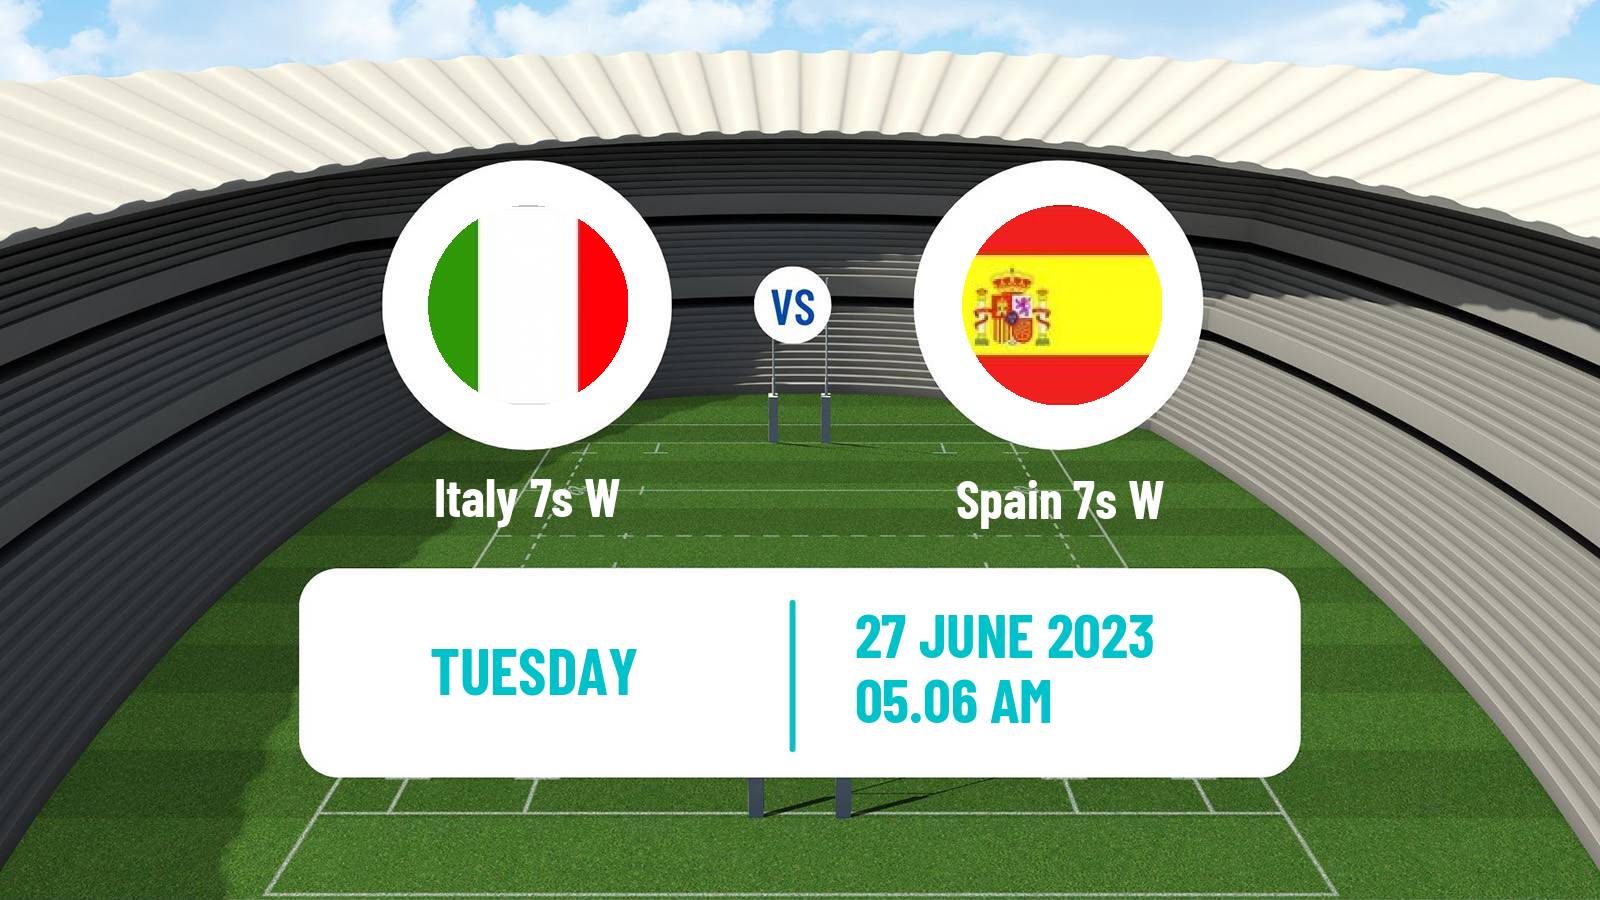 Rugby union European Games 7s Rugby Women Italy 7s W - Spain 7s W